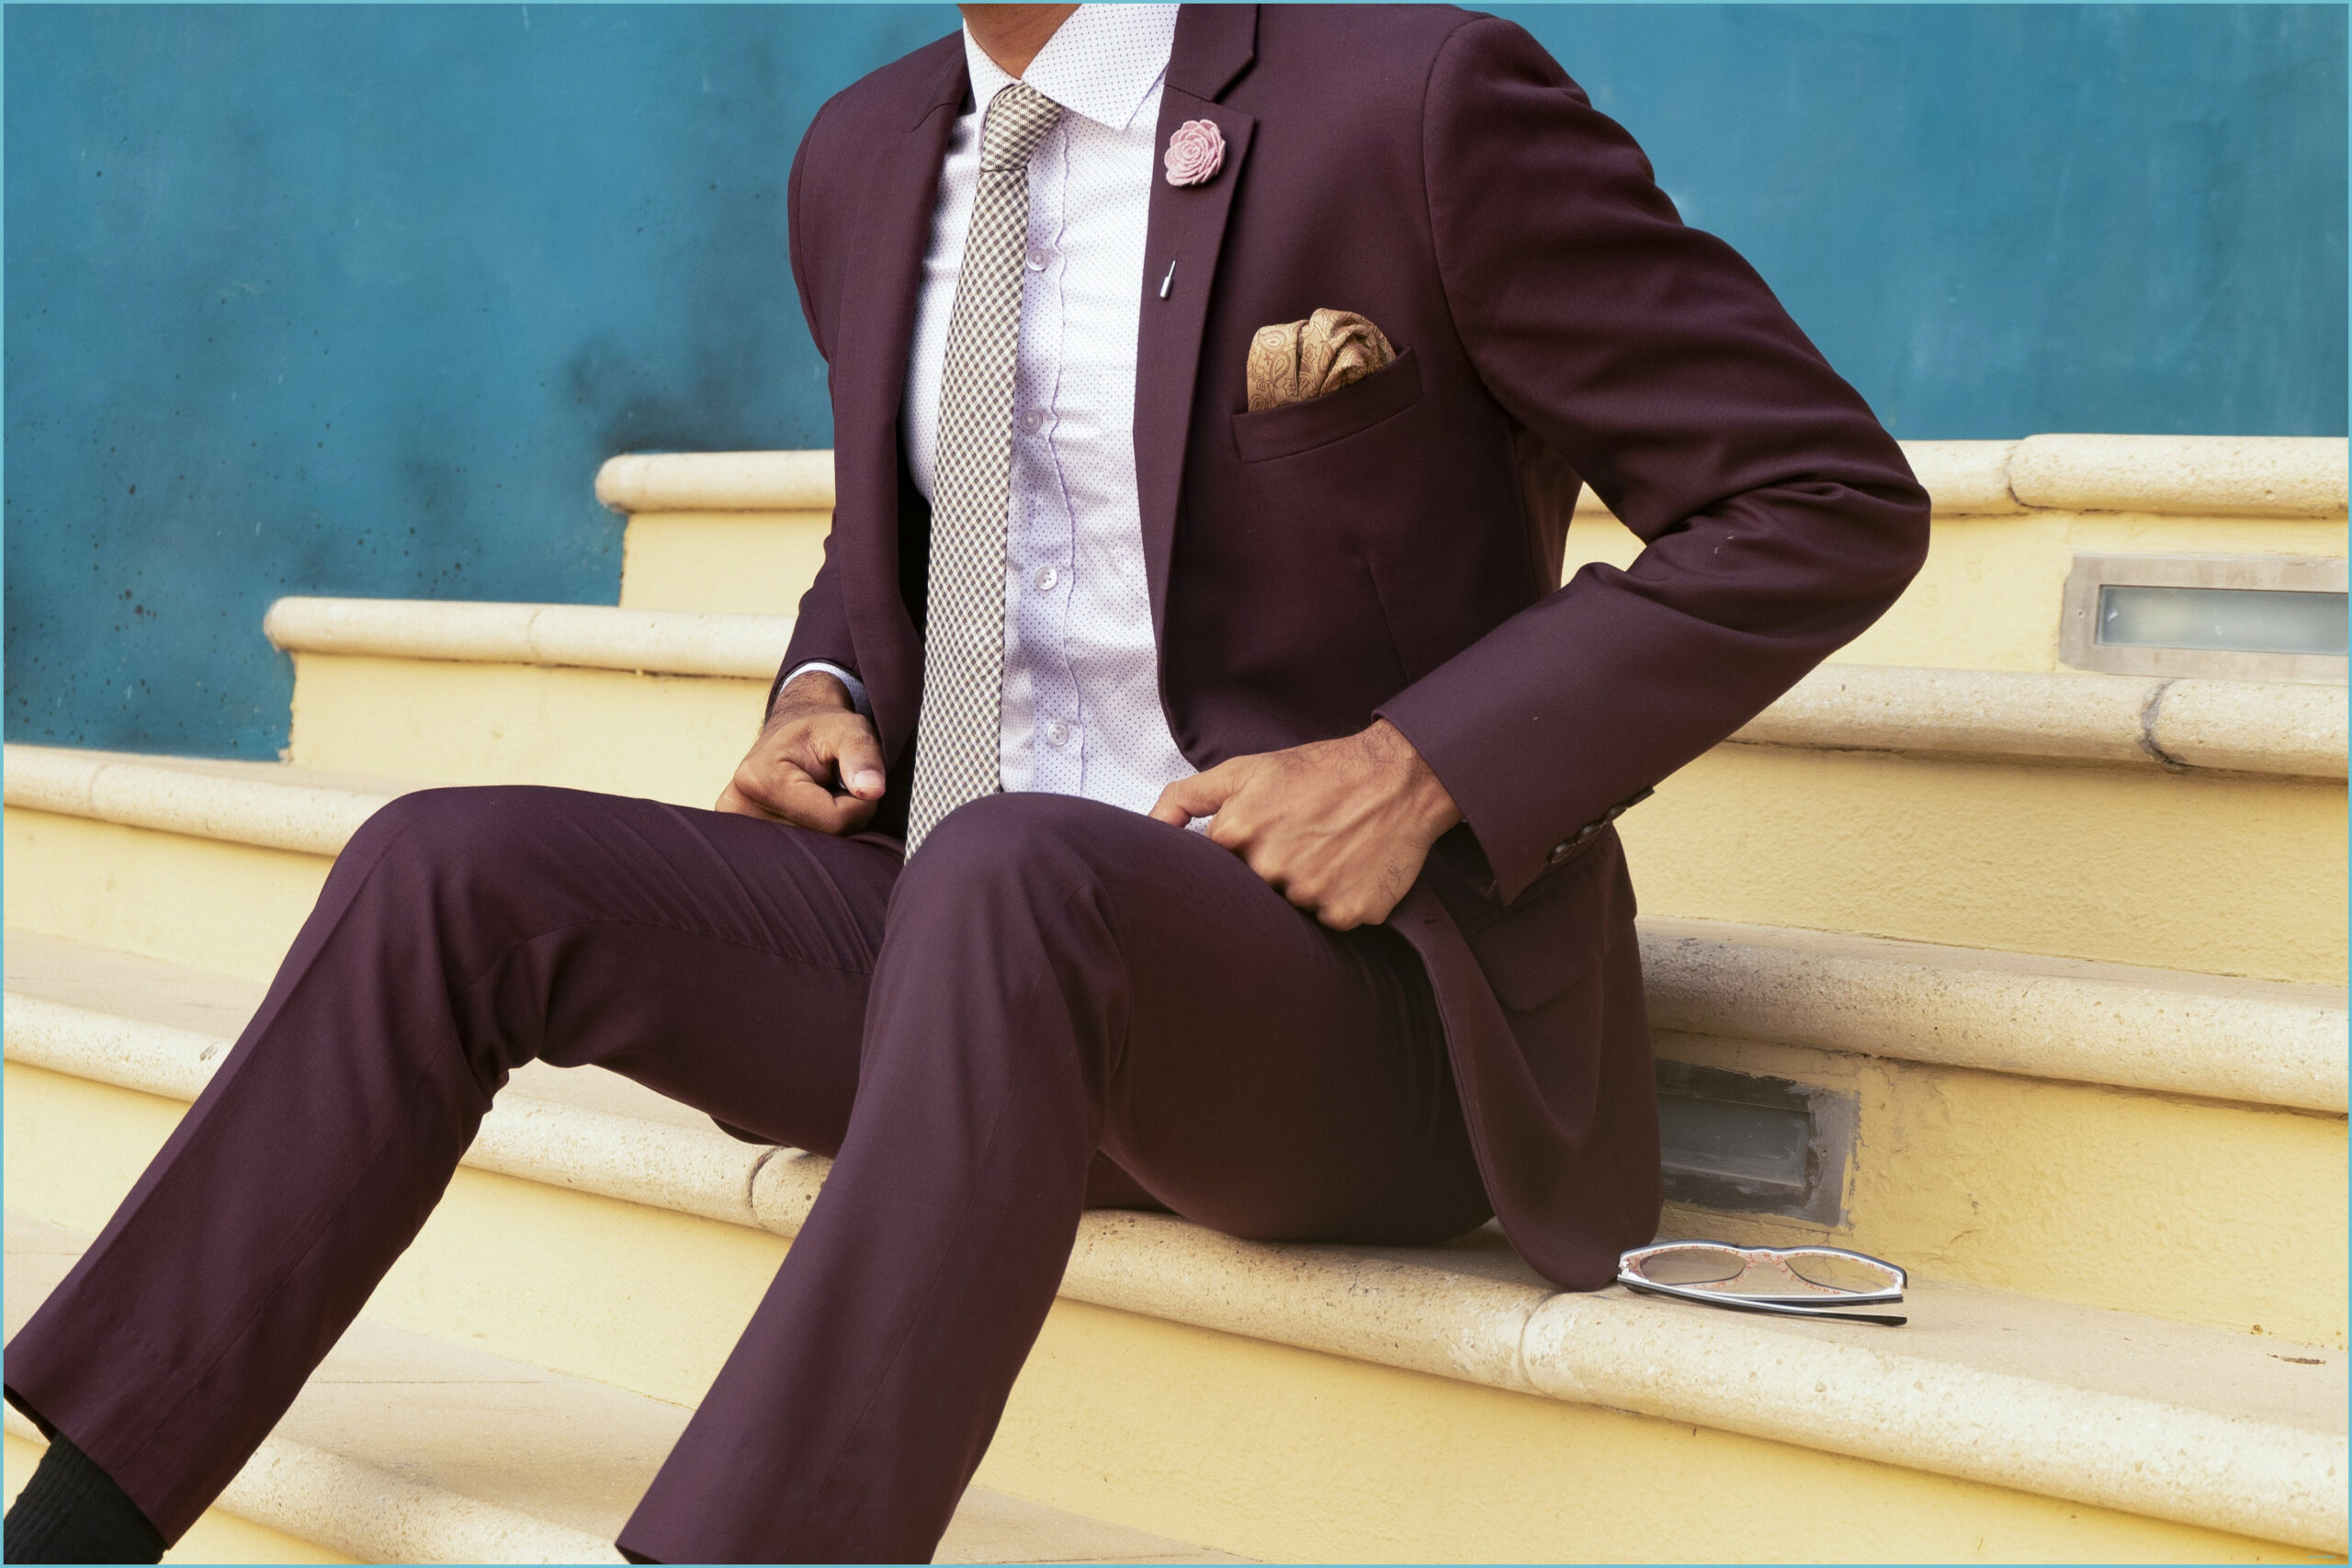 Best Man In Suit Photo · 80% Free Download · Pant Wallpaper